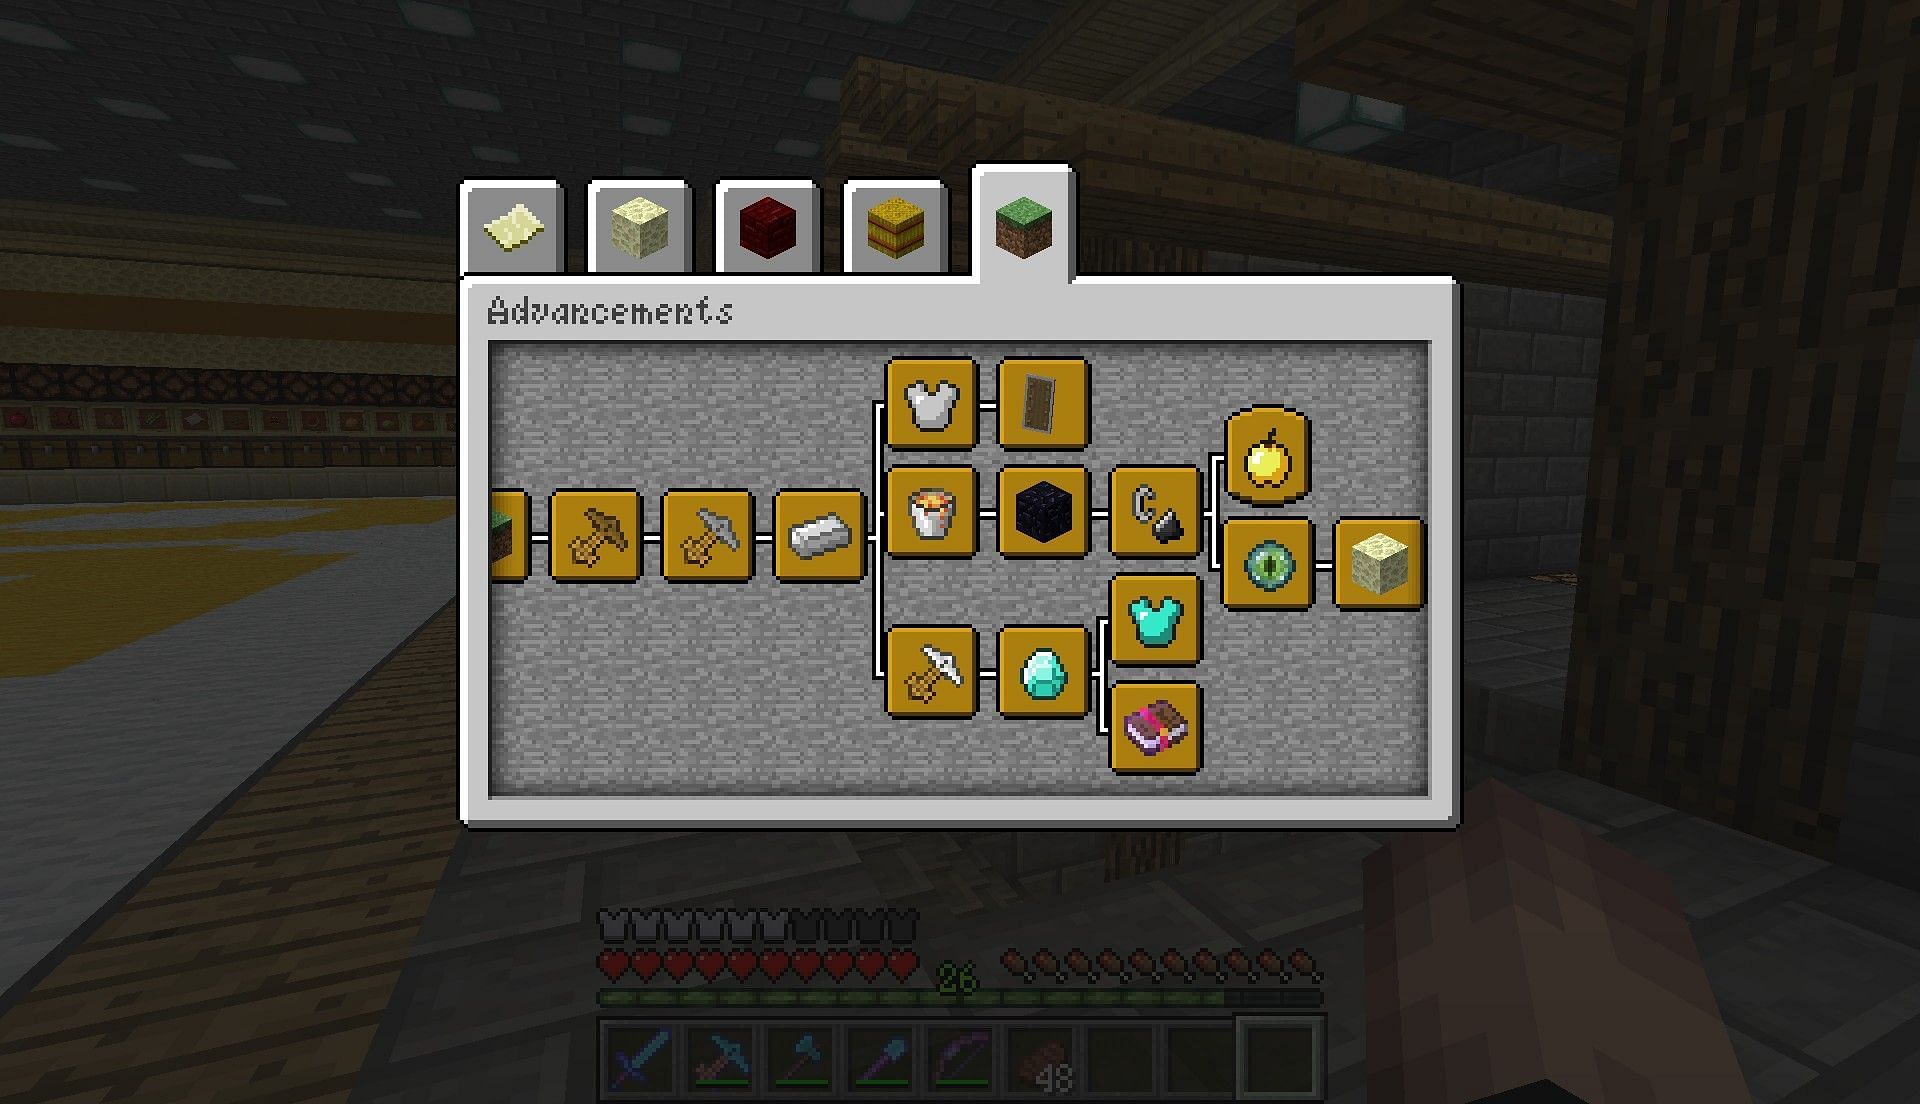 Advancements are one way to measure progress in Minecraft (Image via Minecraft)